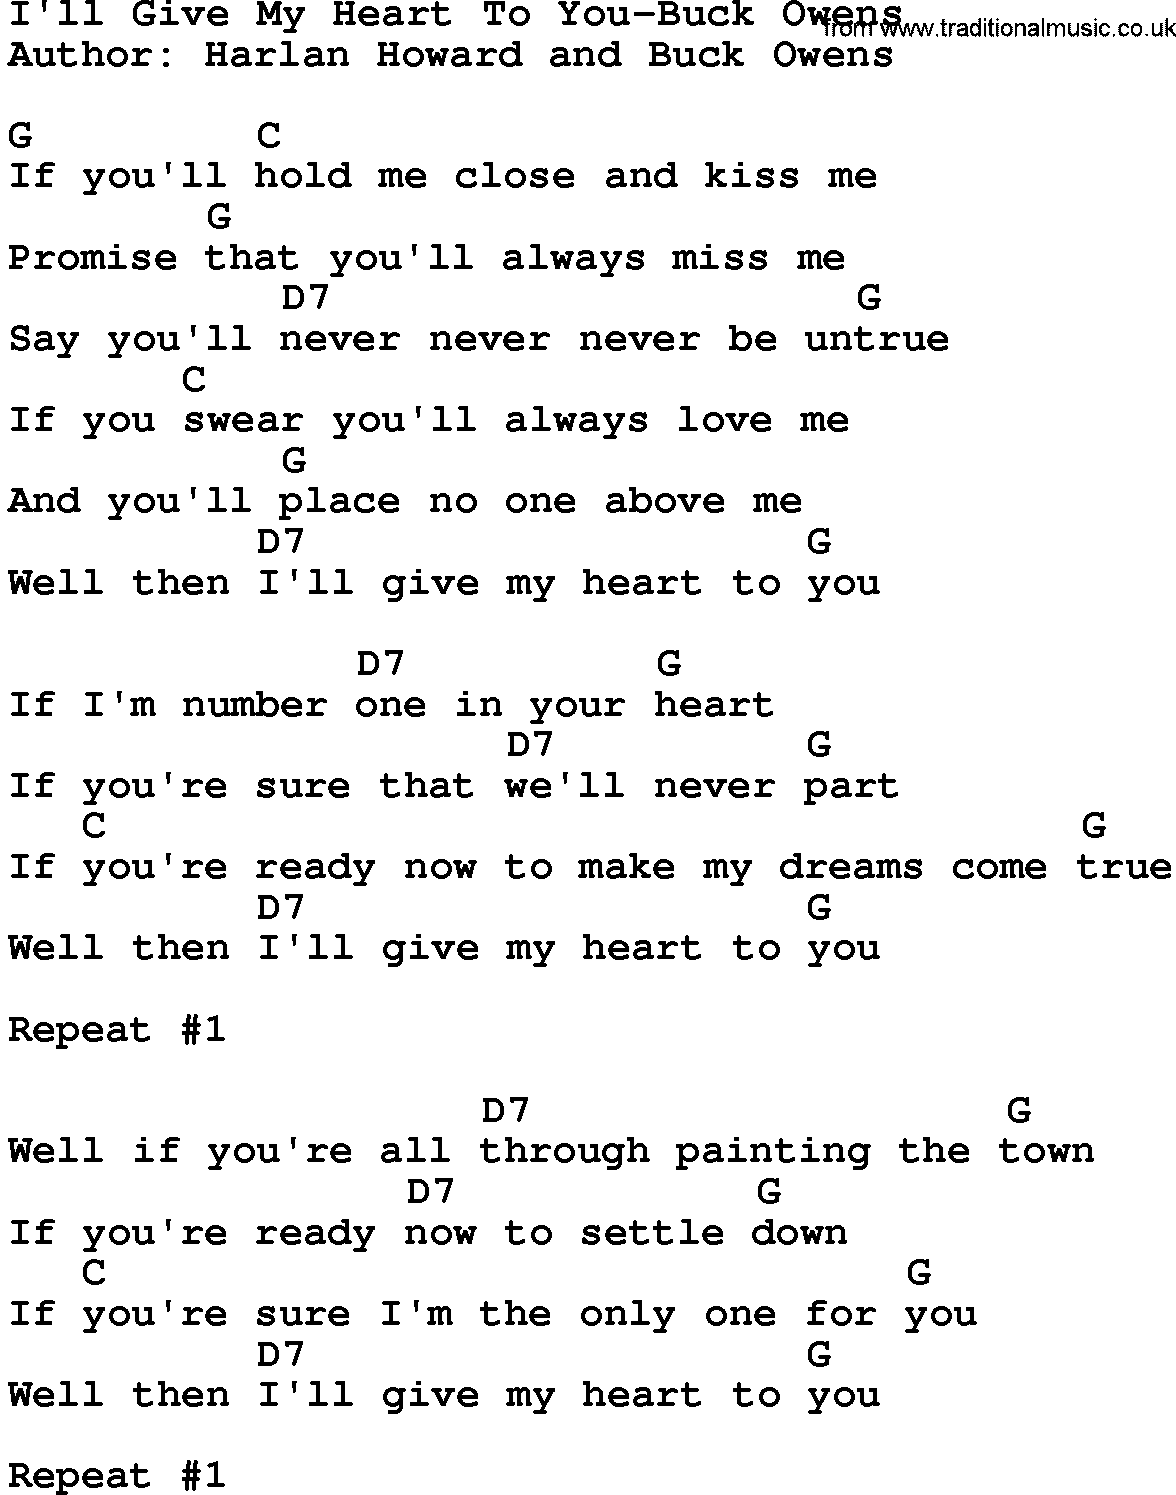 Country music song: I'll Give My Heart To You-Buck Owens lyrics and chords